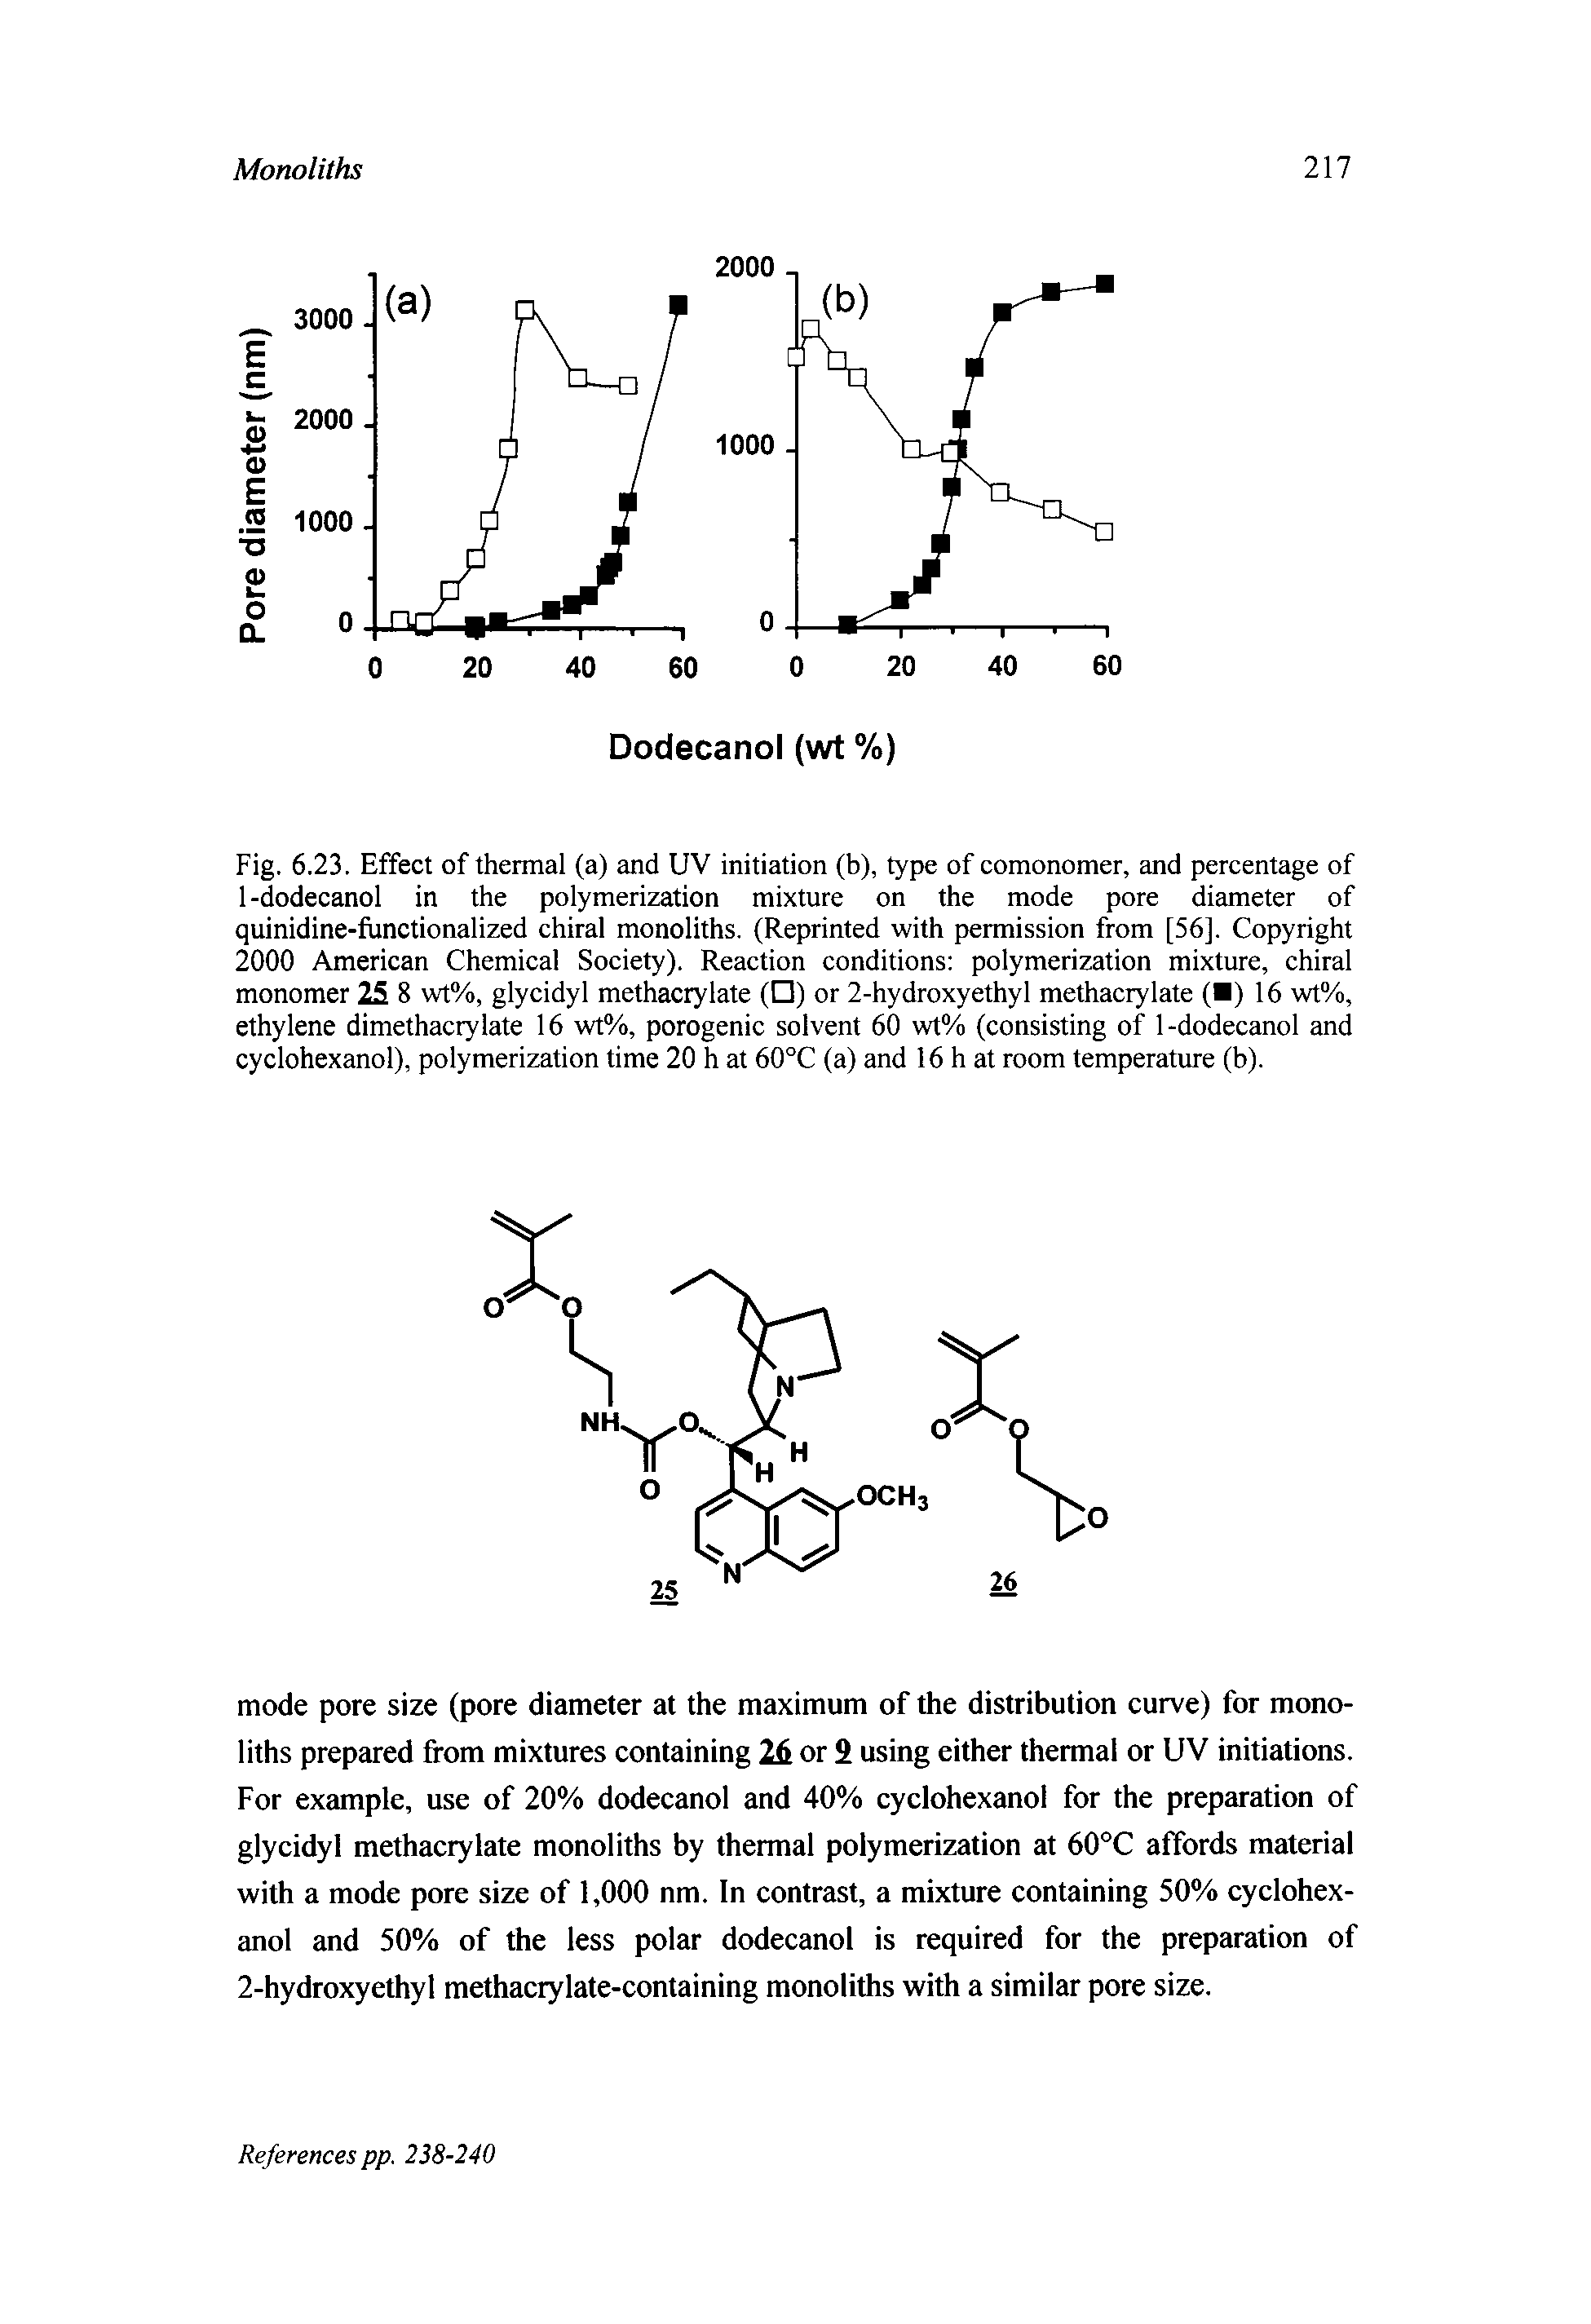 Fig. 6.23. Effect of thermal (a) and UV initiation (b), type of comonomer, and percentage of 1-dodecanol in the polymerization mixture on the mode pore diameter of quinidine-functionalized chiral monoliths. (Reprinted with permission from [56]. Copyright 2000 American Chemical Society). Reaction conditions polymerization mixture, chiral monomer 25 8 wt%, glycidyl methacrylate ( ) or 2-hydroxyethyl methacrylate ( ) 16 wt%, ethylene dimethacrylate 16 wt%, porogenic solvent 60 wt% (consisting of 1-dodecanol and cyclohexanol), polymerization time 20 h at 60°C (a) and 16 h at room temperature (b).